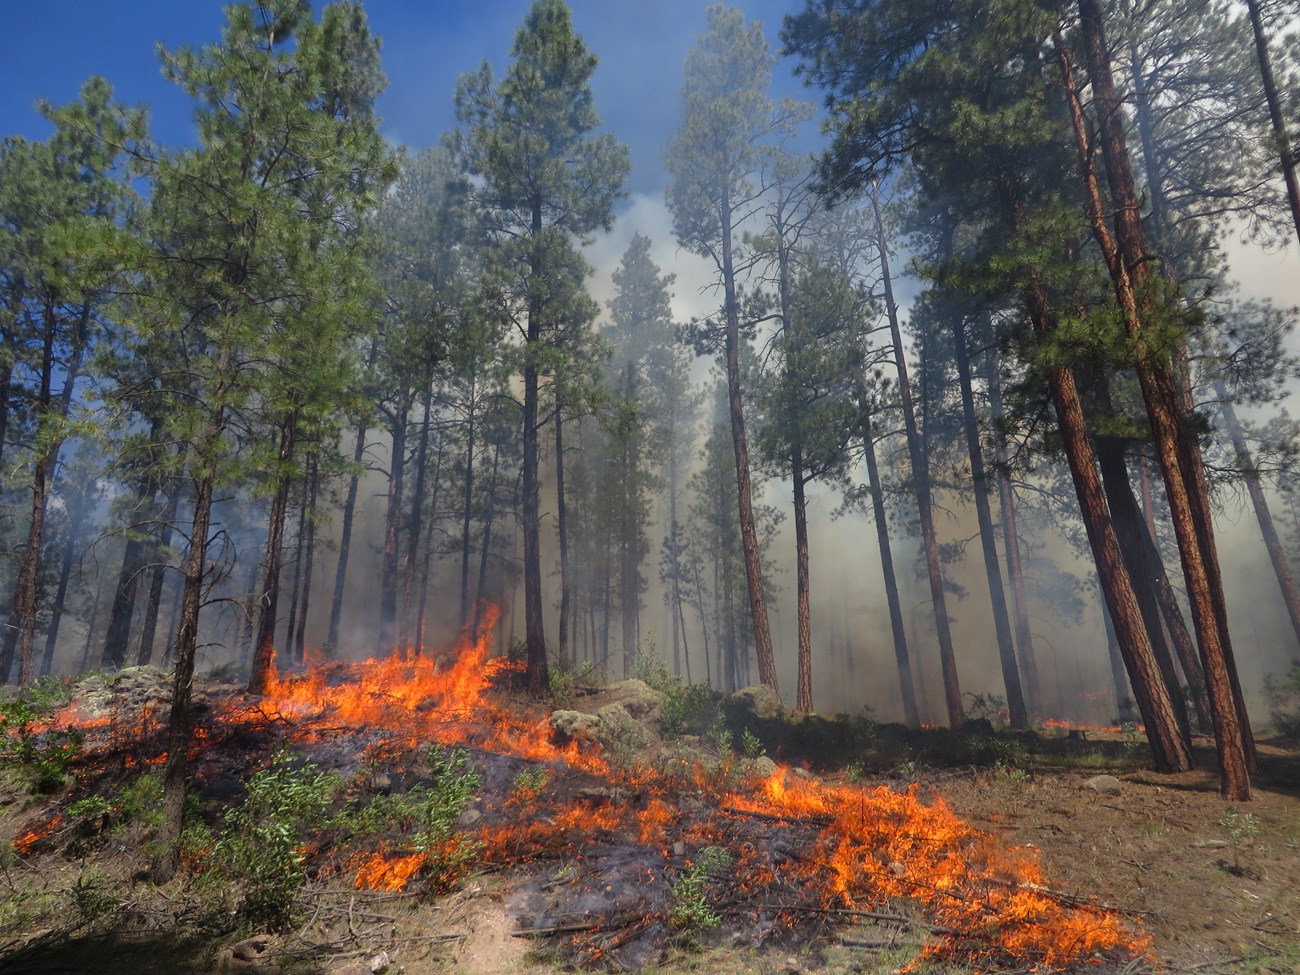 low, crawling ground fire in ponderosa pine forest